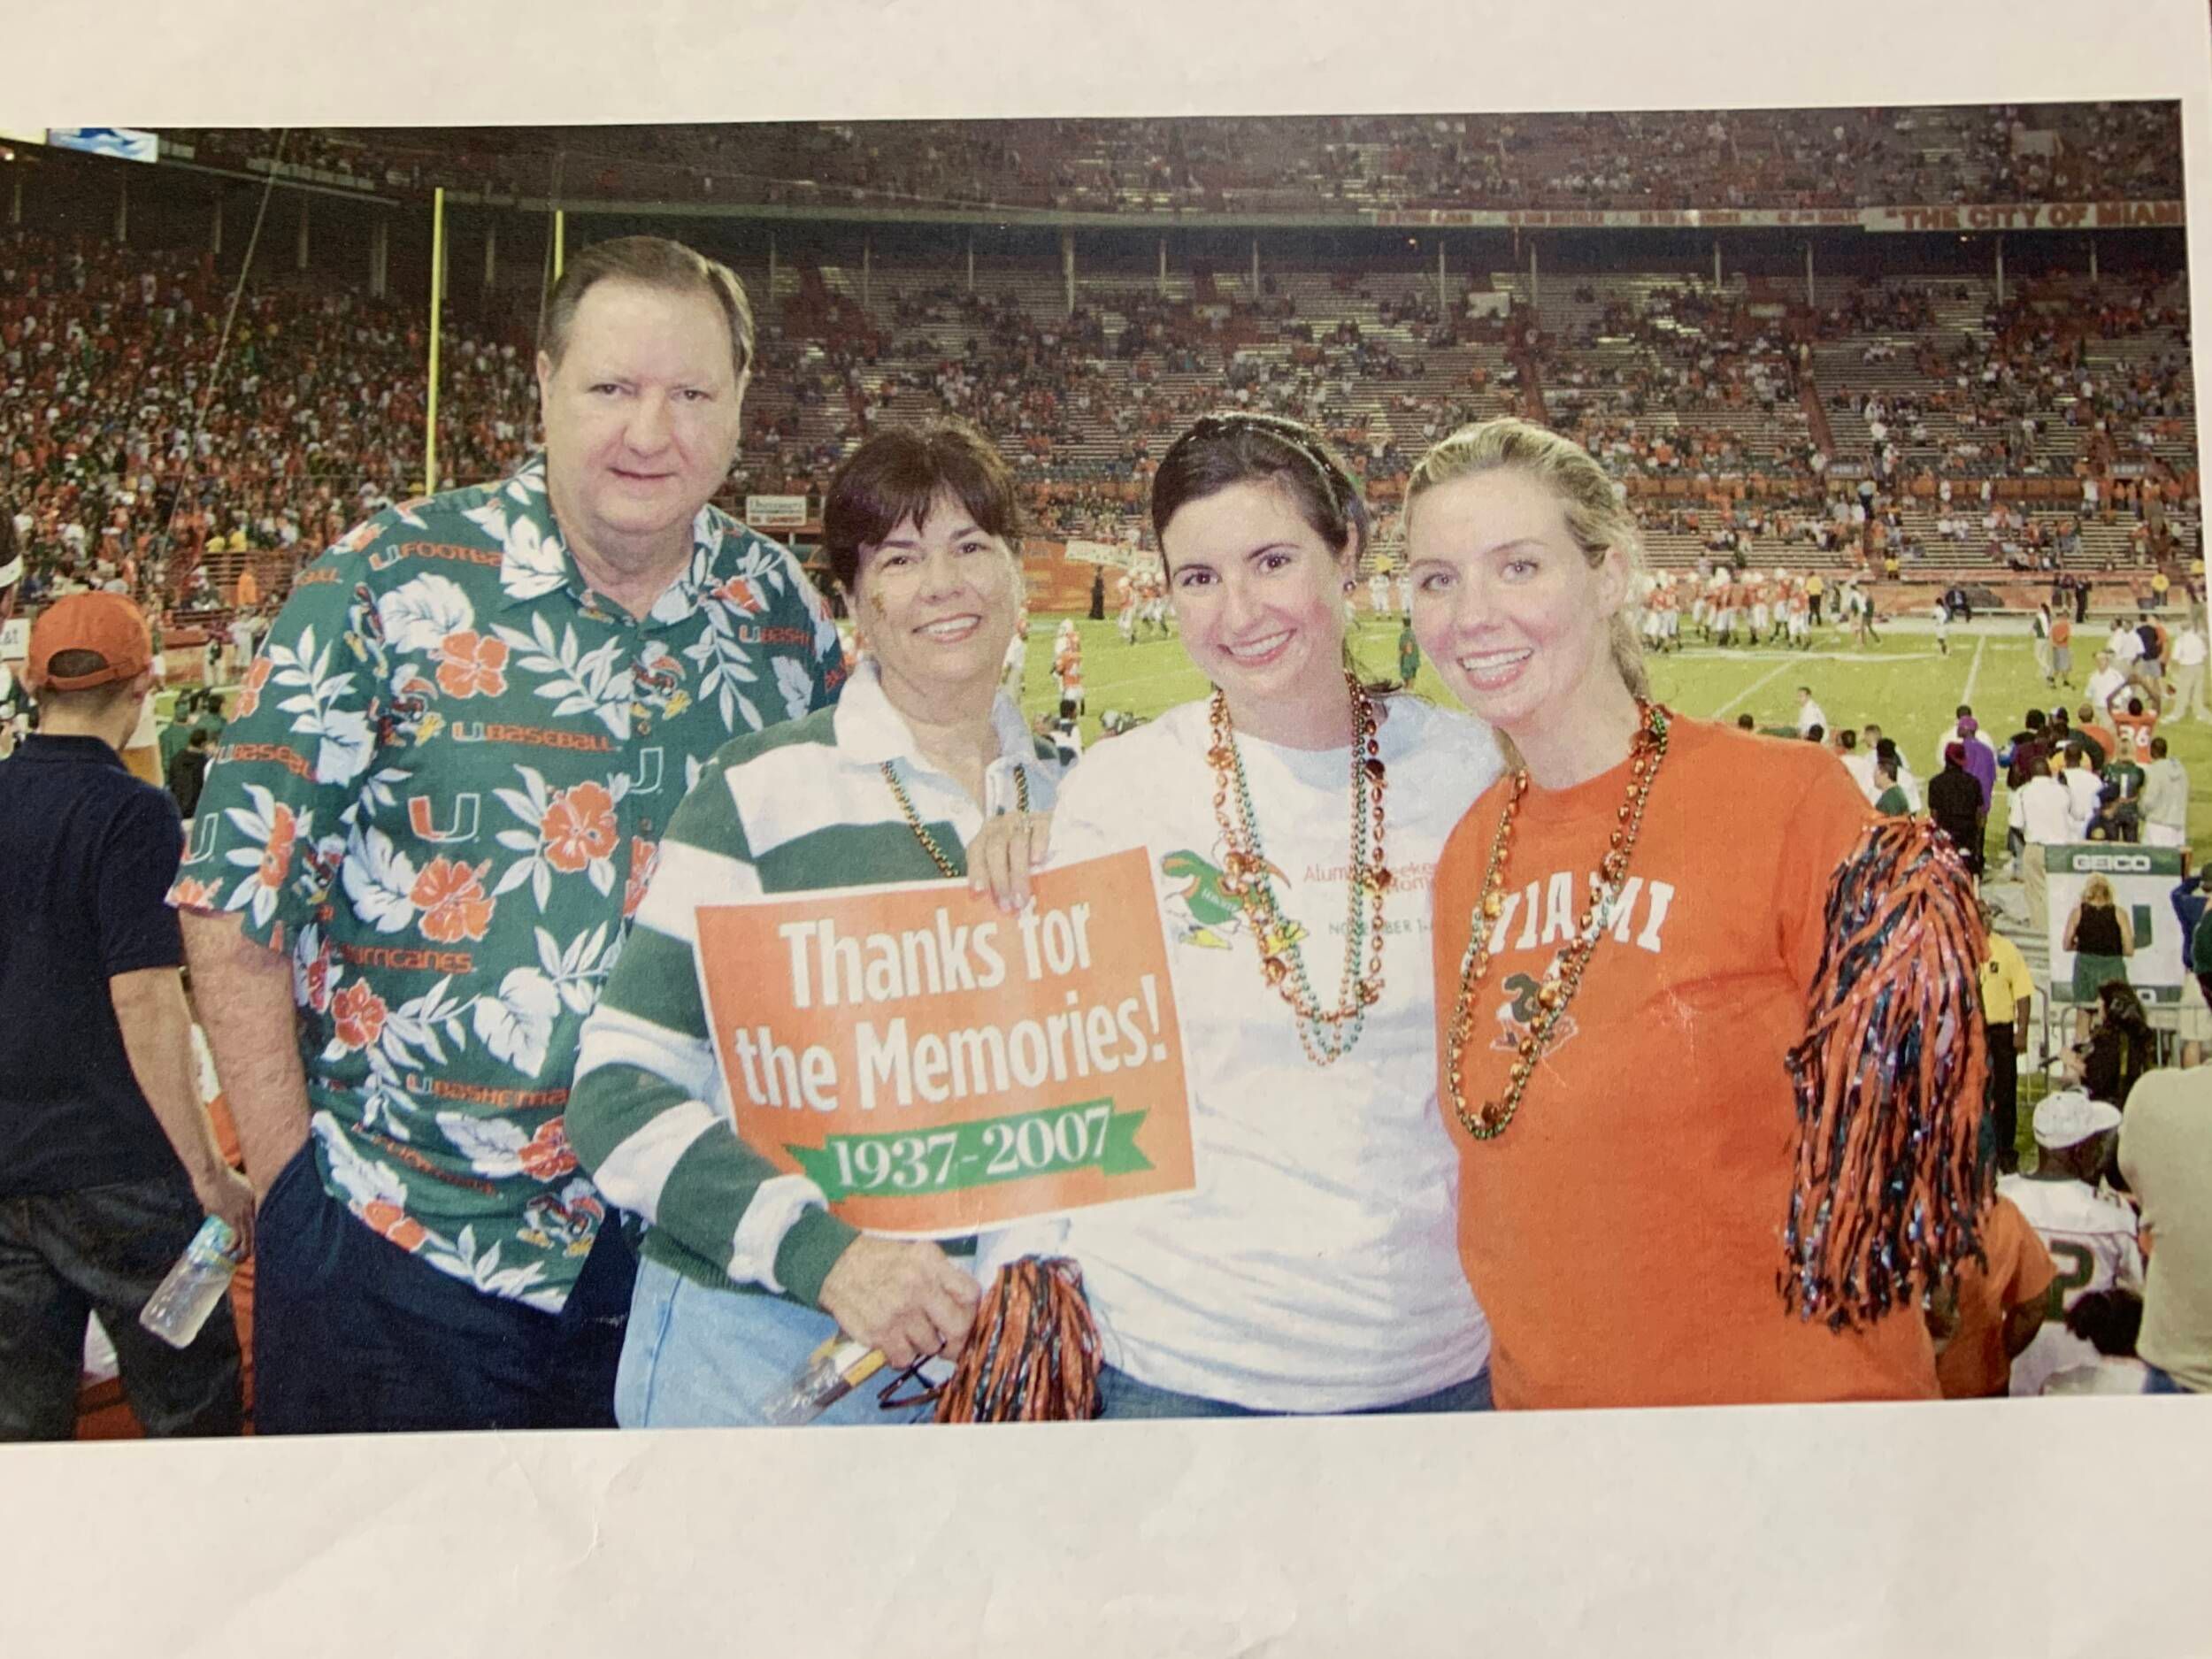 Seasoned Canes: Fans Share Their Stories – University of Miami Athletics